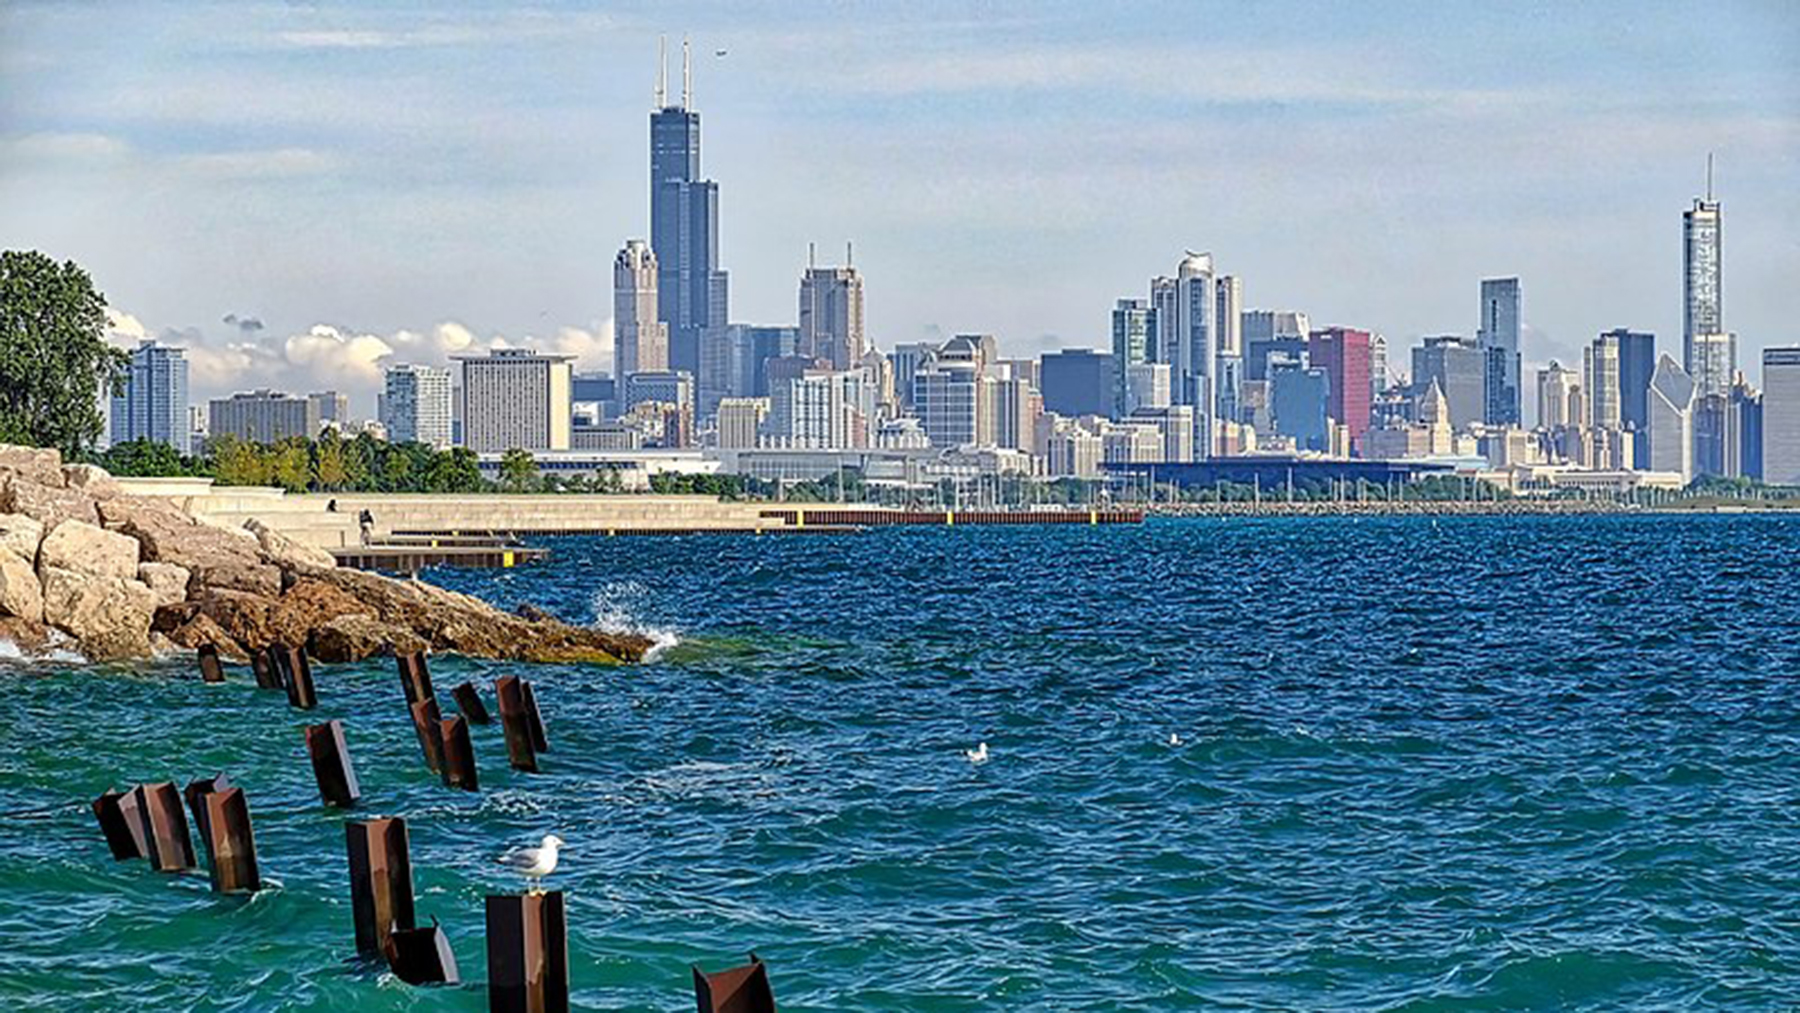 Lake Michigan shoreline against the Chicago cityscape. Photo by Brian Kay